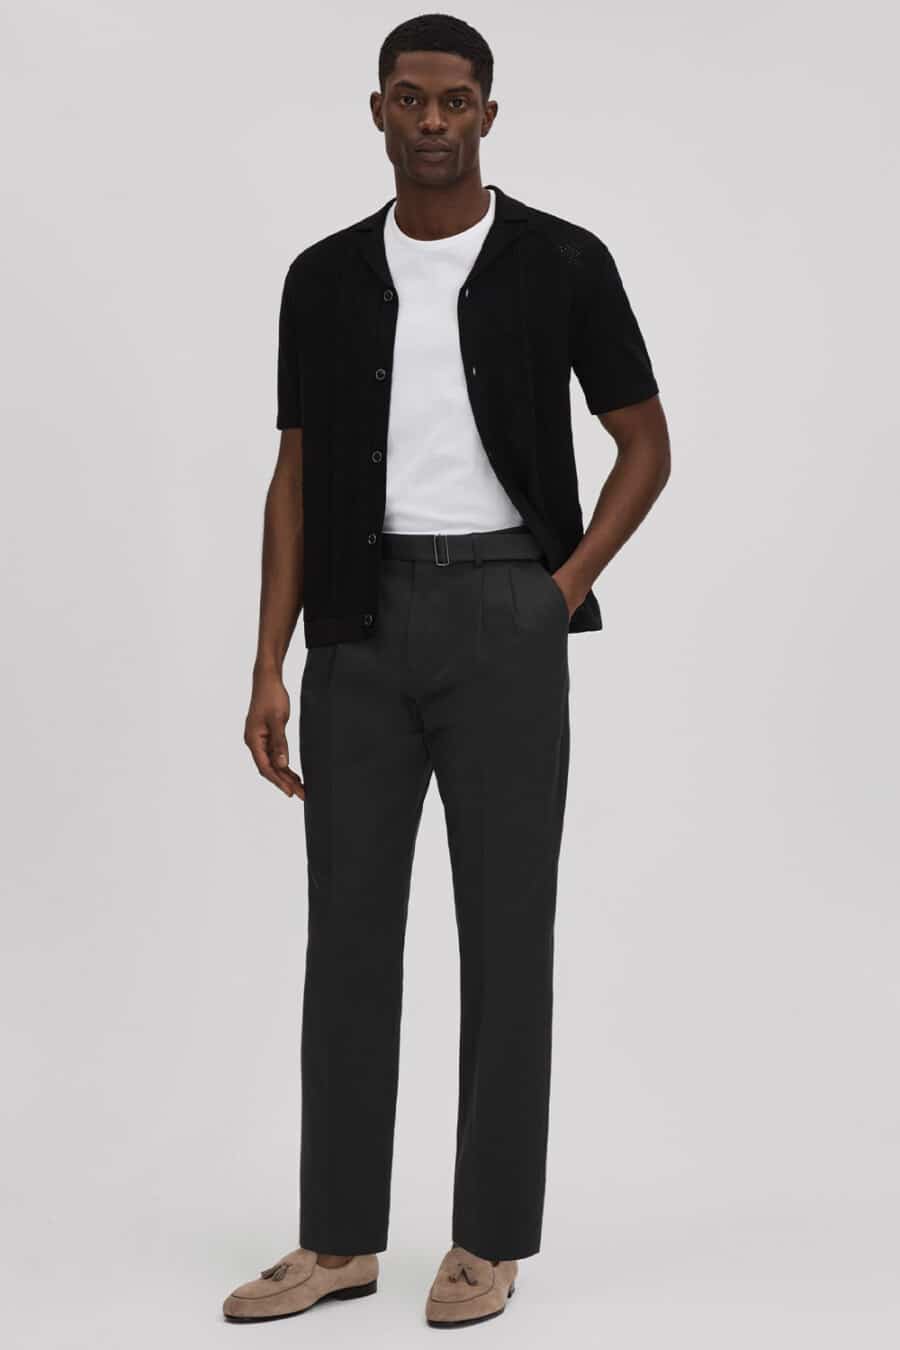 Men's black tailored pants, white T-shirt, black open knit shirt and taupe suede tassel loafers outfit